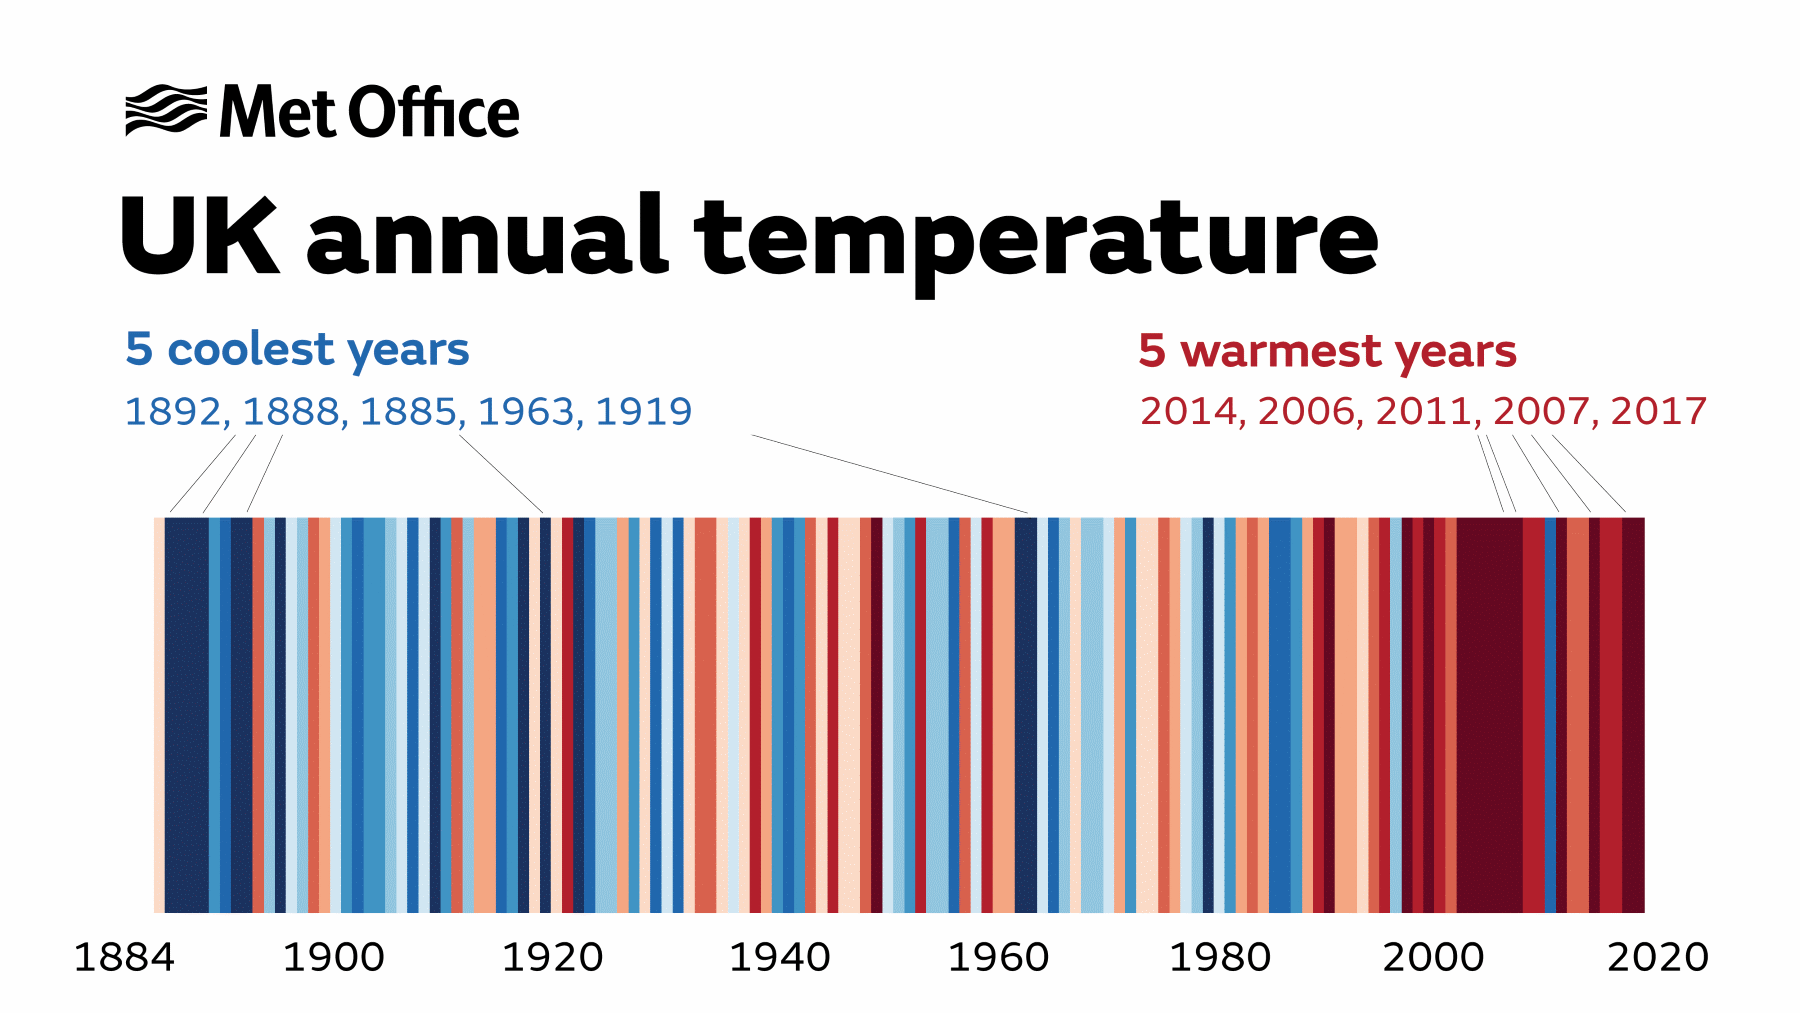 Shows annual temperature from 1884 to 2020 with the 5 warmest years being since 2000.